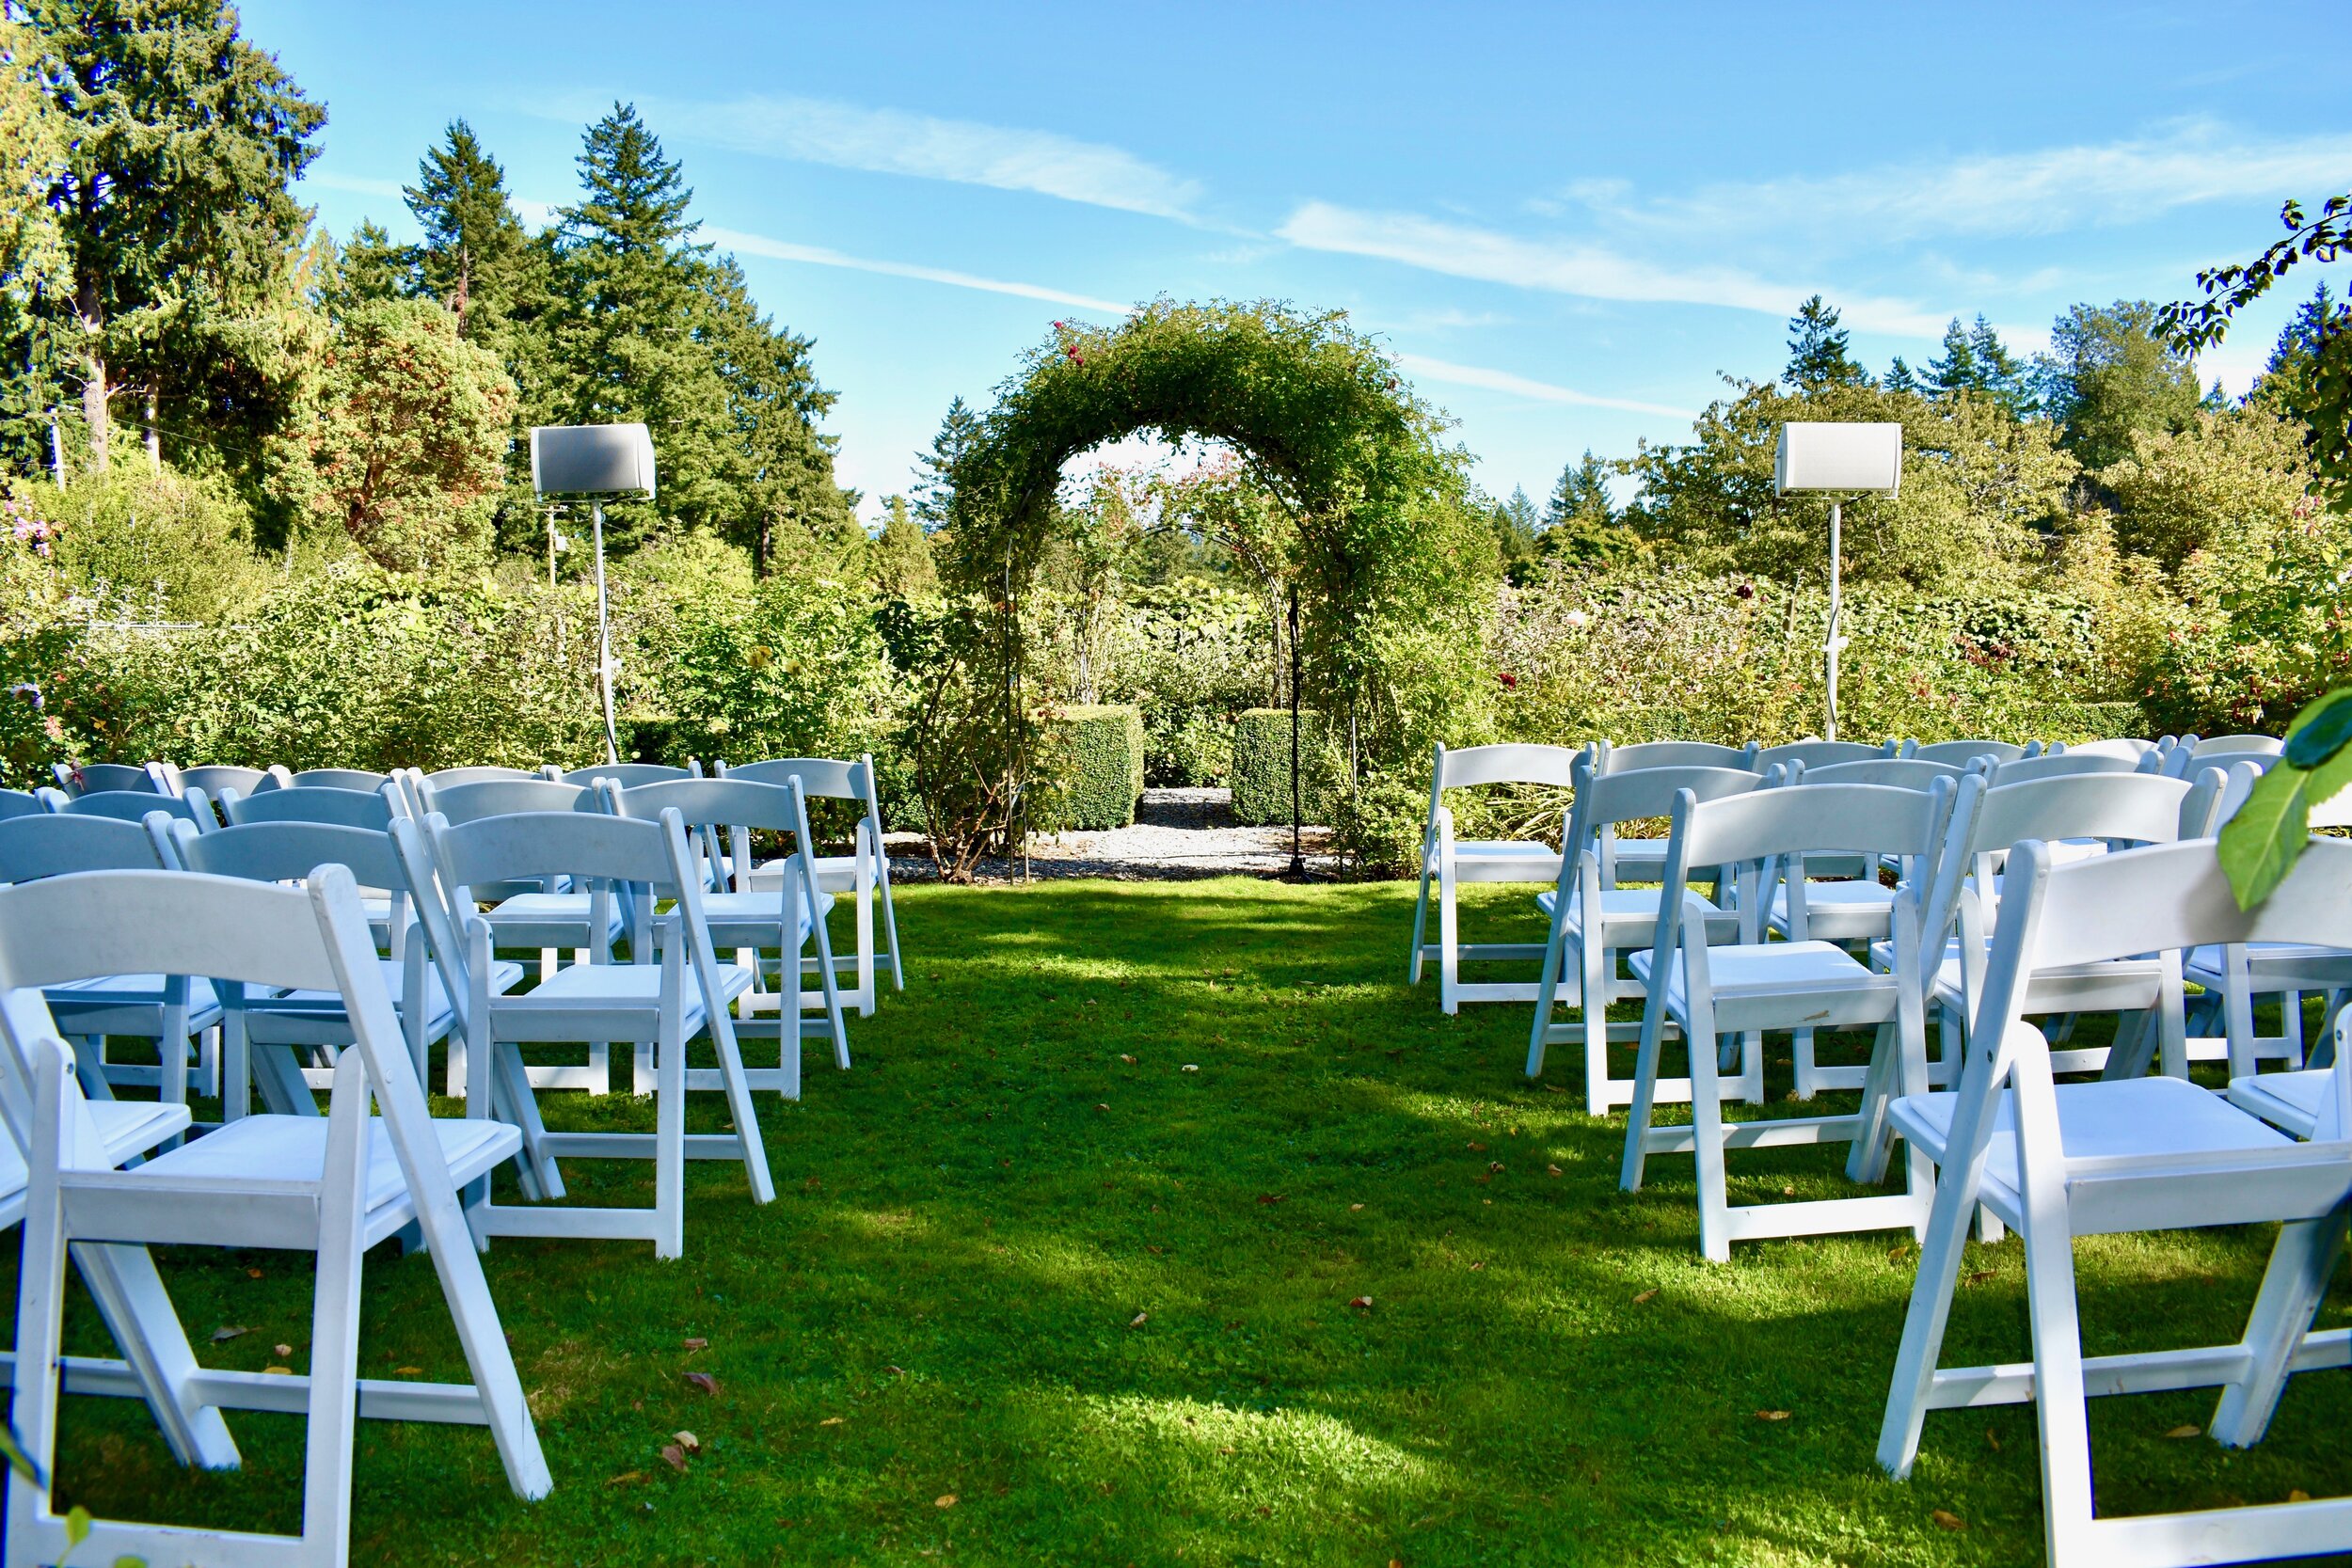 Wedding Ceremony in a rose garden at Starling Lane Vineyard.  Danley Sound Labs GO2-8CX Speakers on White Tripod stands, 2021